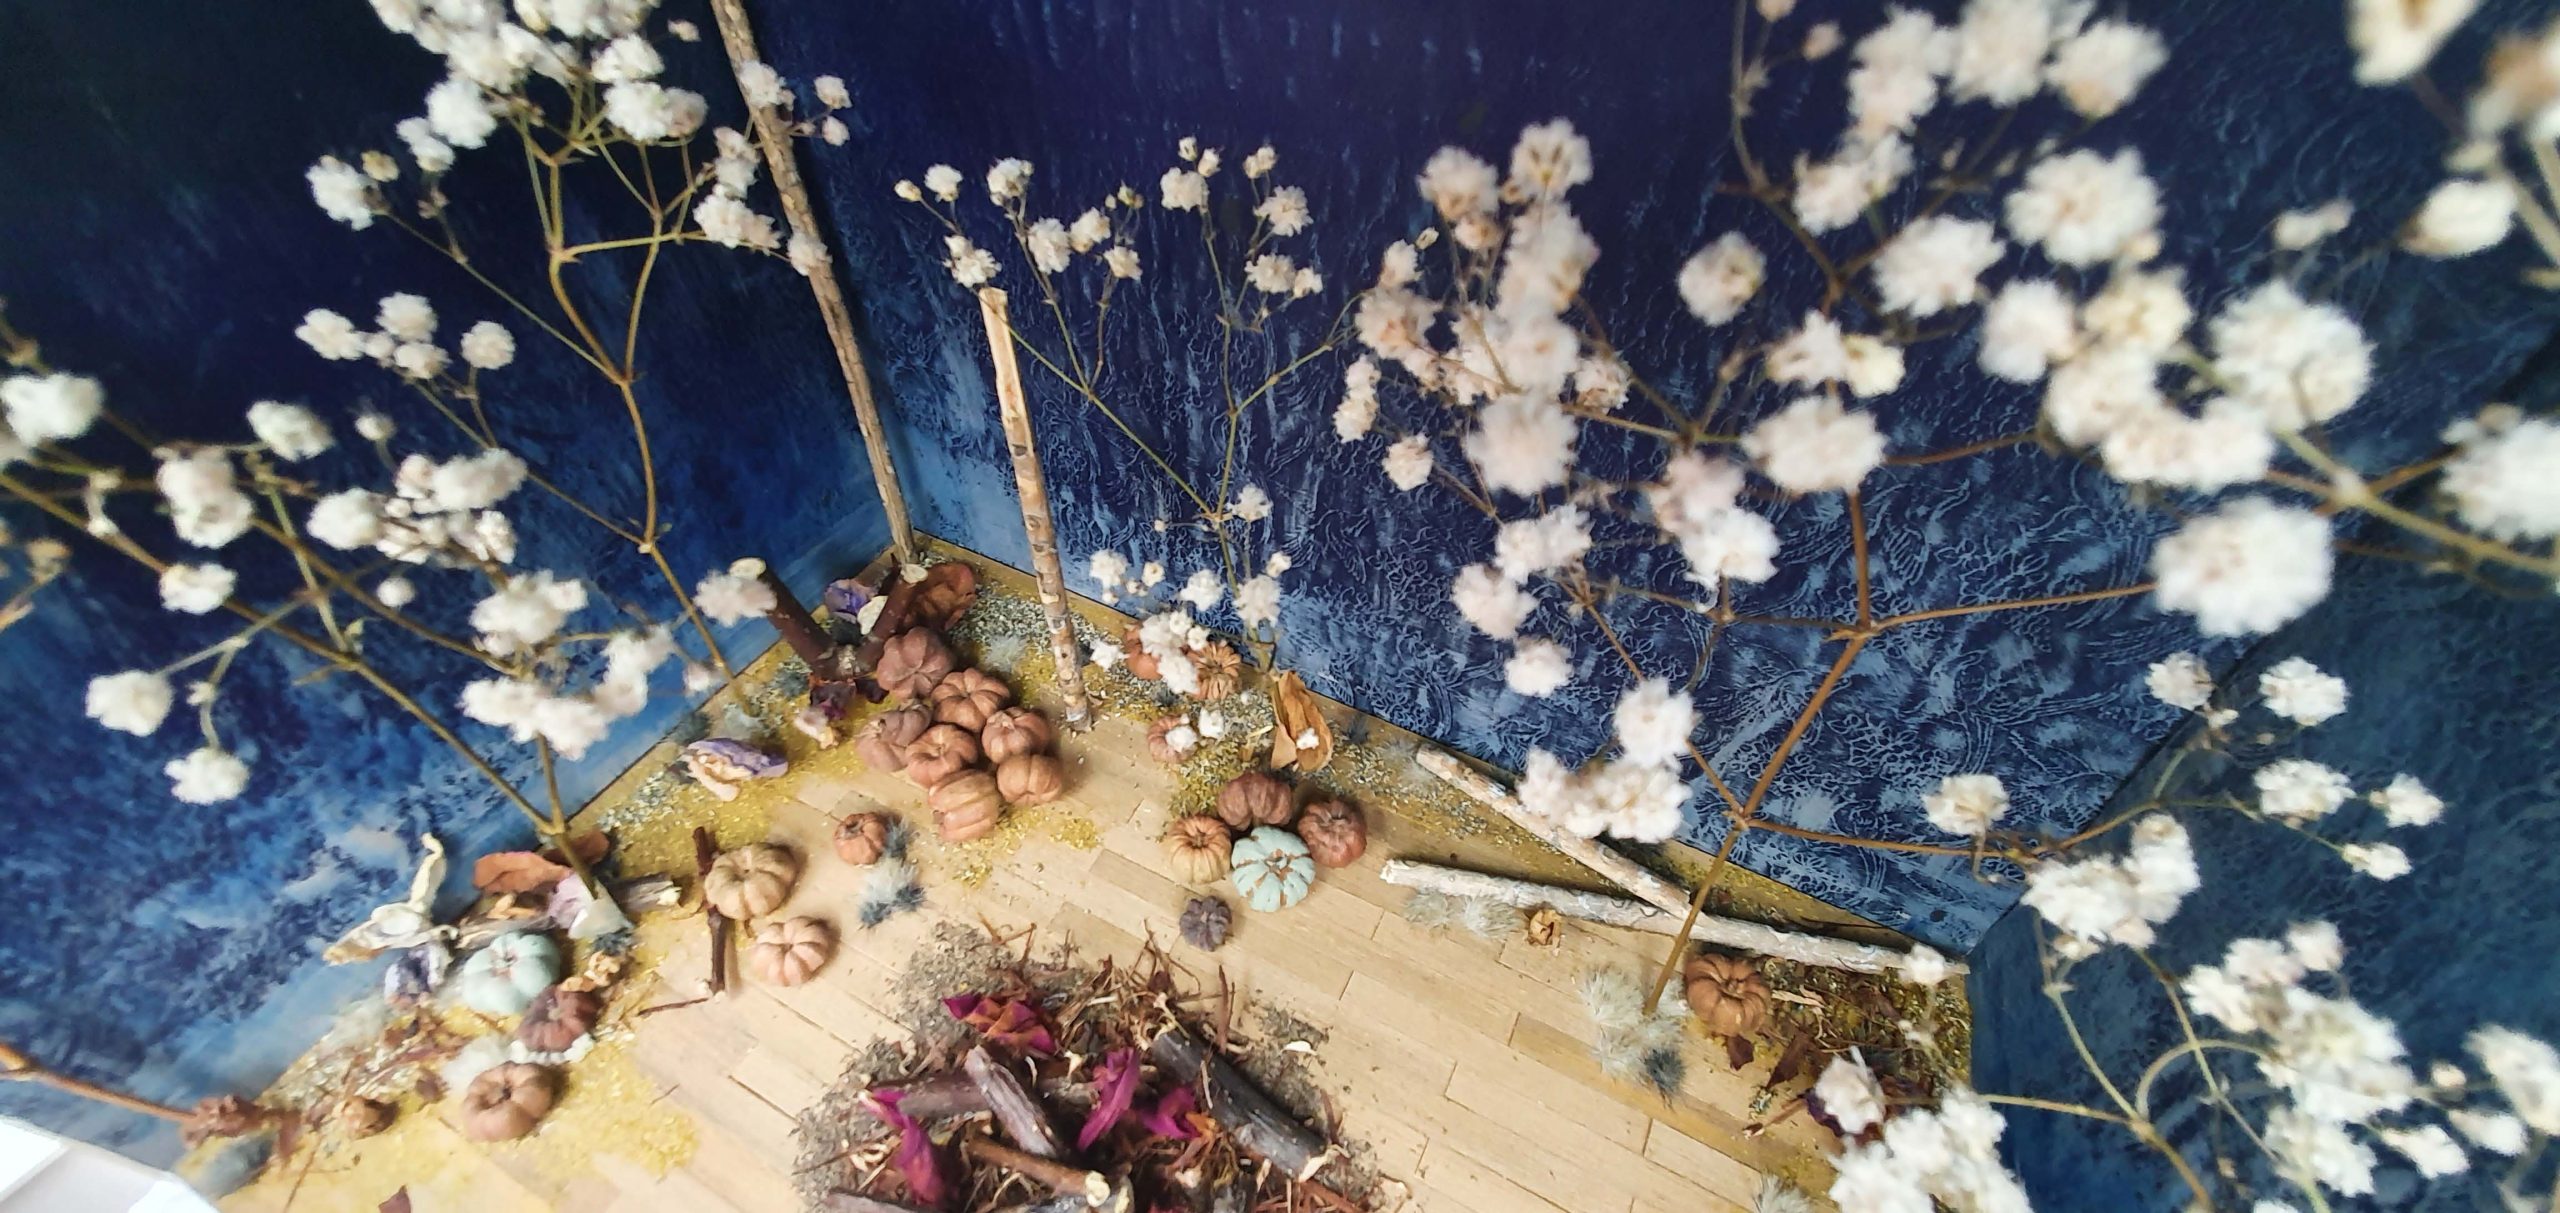 An assortment of dried flowers, seed pods, and small pumpkins are arranged in a room with dark blue textured walls. Branches adorned with white fluffy blooms stand upright against the walls, creating a rustic, natural scene. The wooden floor is scattered with petals and leaves.